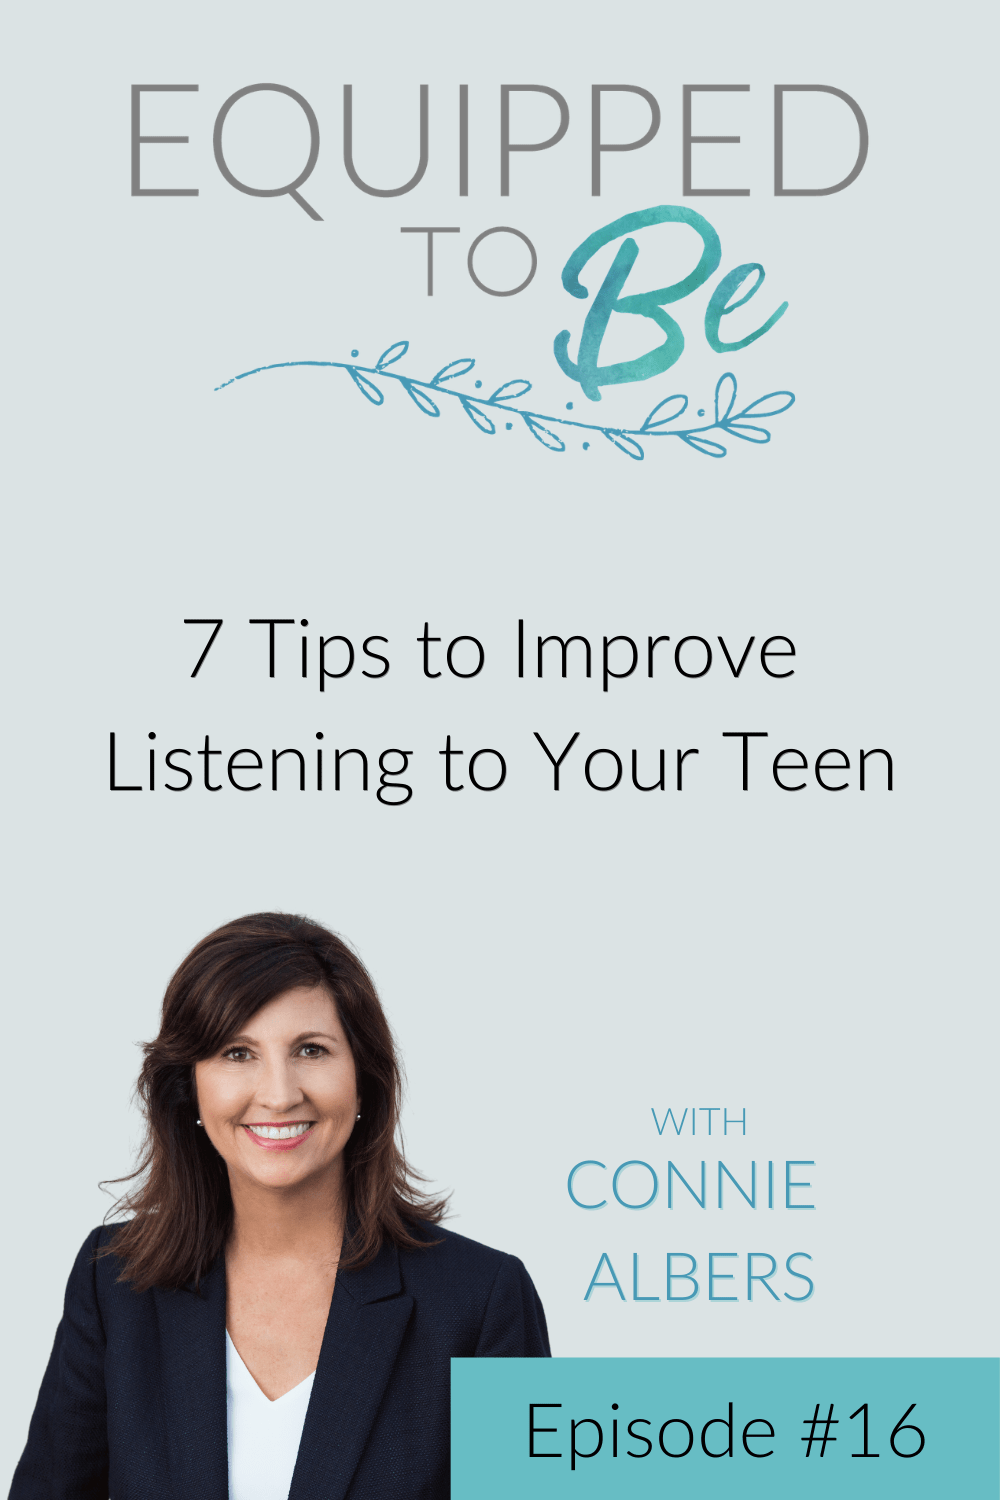 7 Tips to Improve Listening to Your Teen - ETB #16